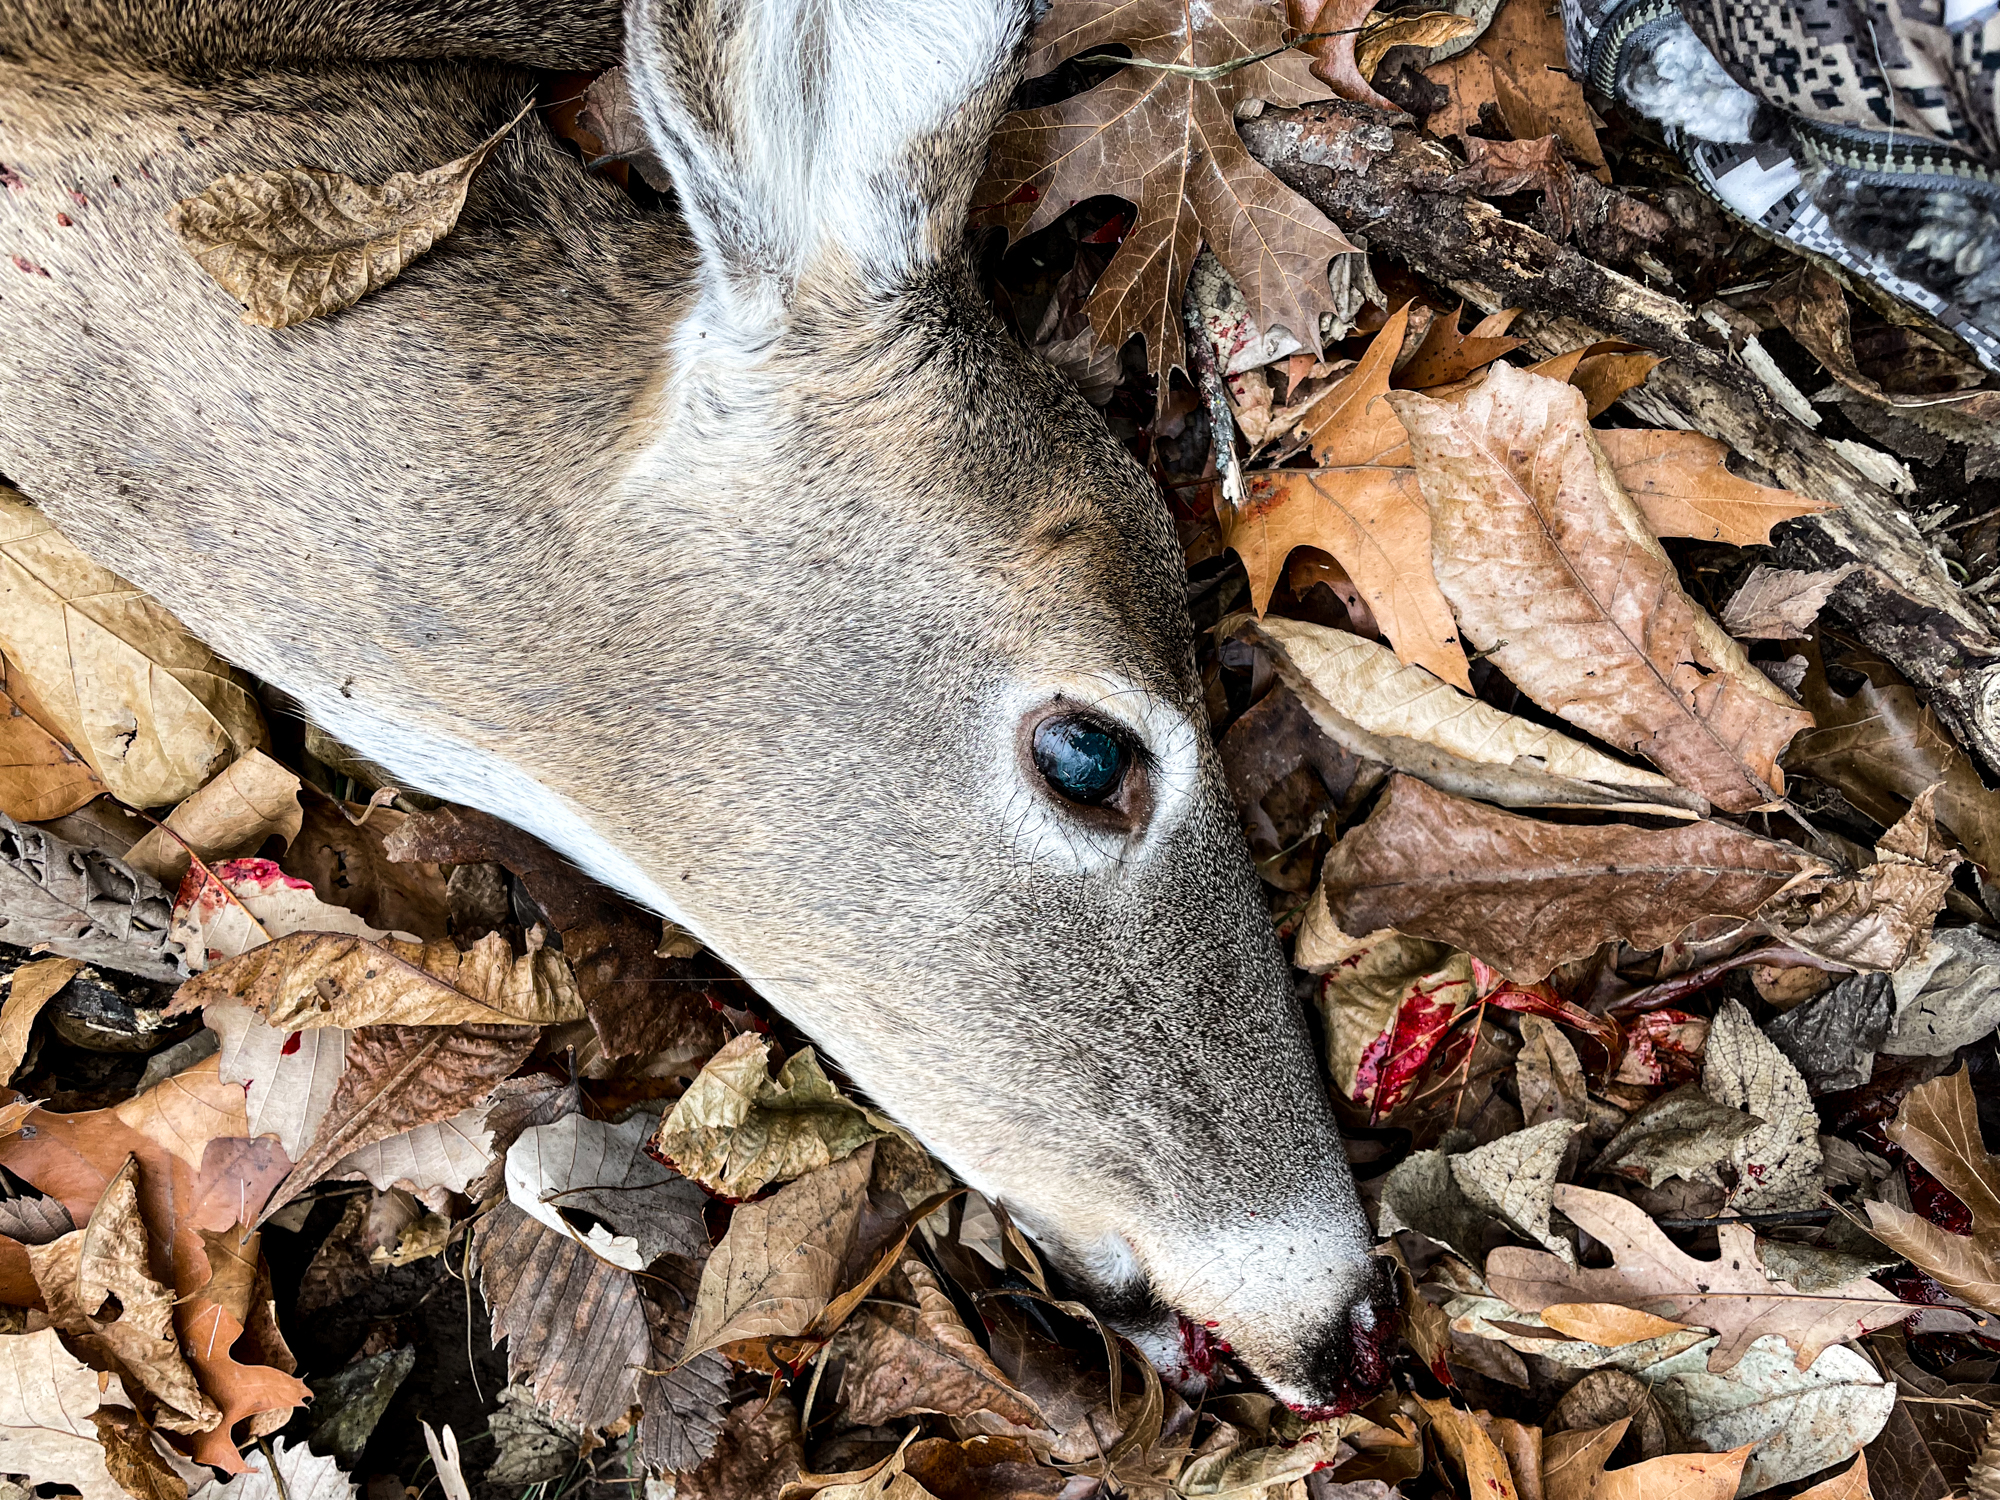 A whitetail doe's head rests in the leaves after a hunt.